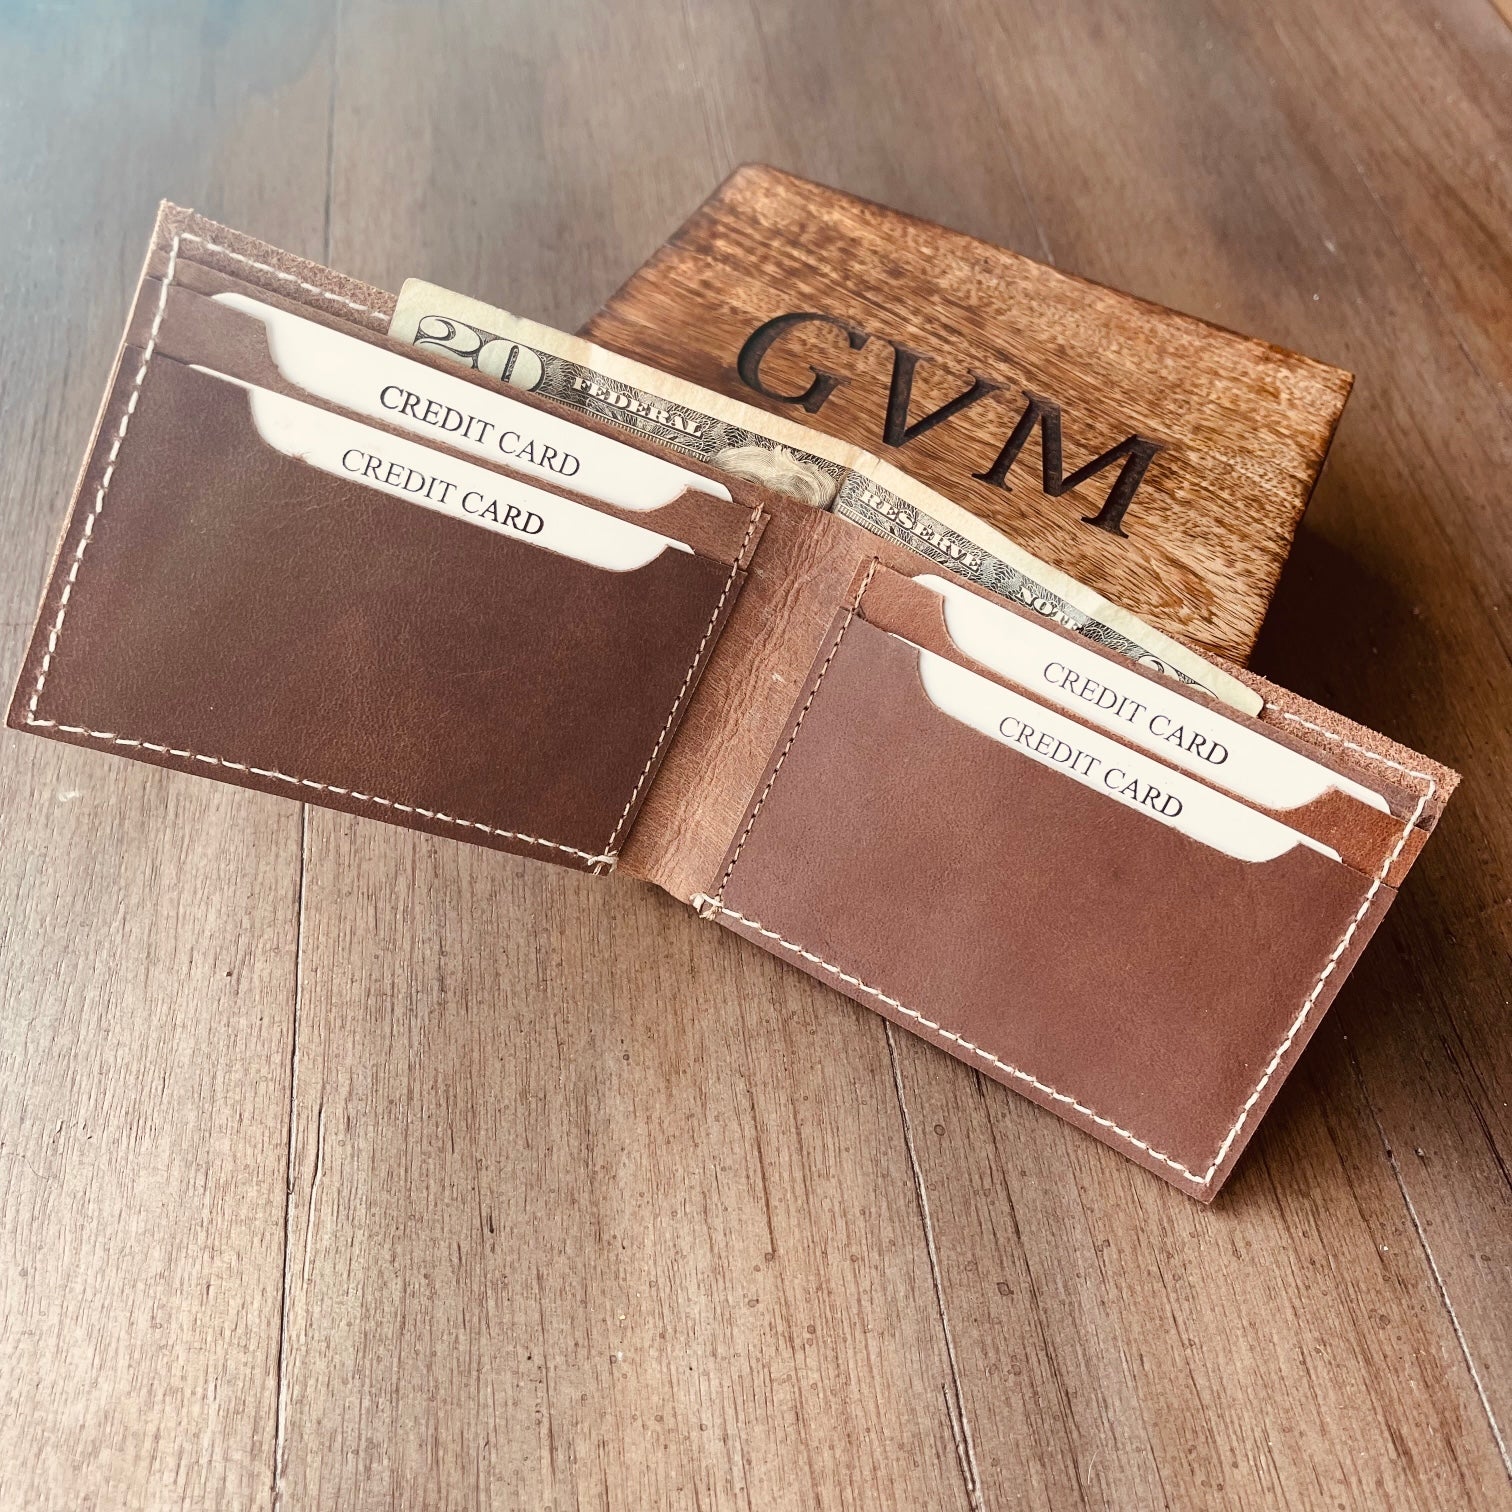  PERSONALIZED Leather Wallet. Tan Brown and Blue Credit Card,  Cash or ID Holder. Rustic Style Unisex Pouch. Monogram your Name or  Initials : Handmade Products